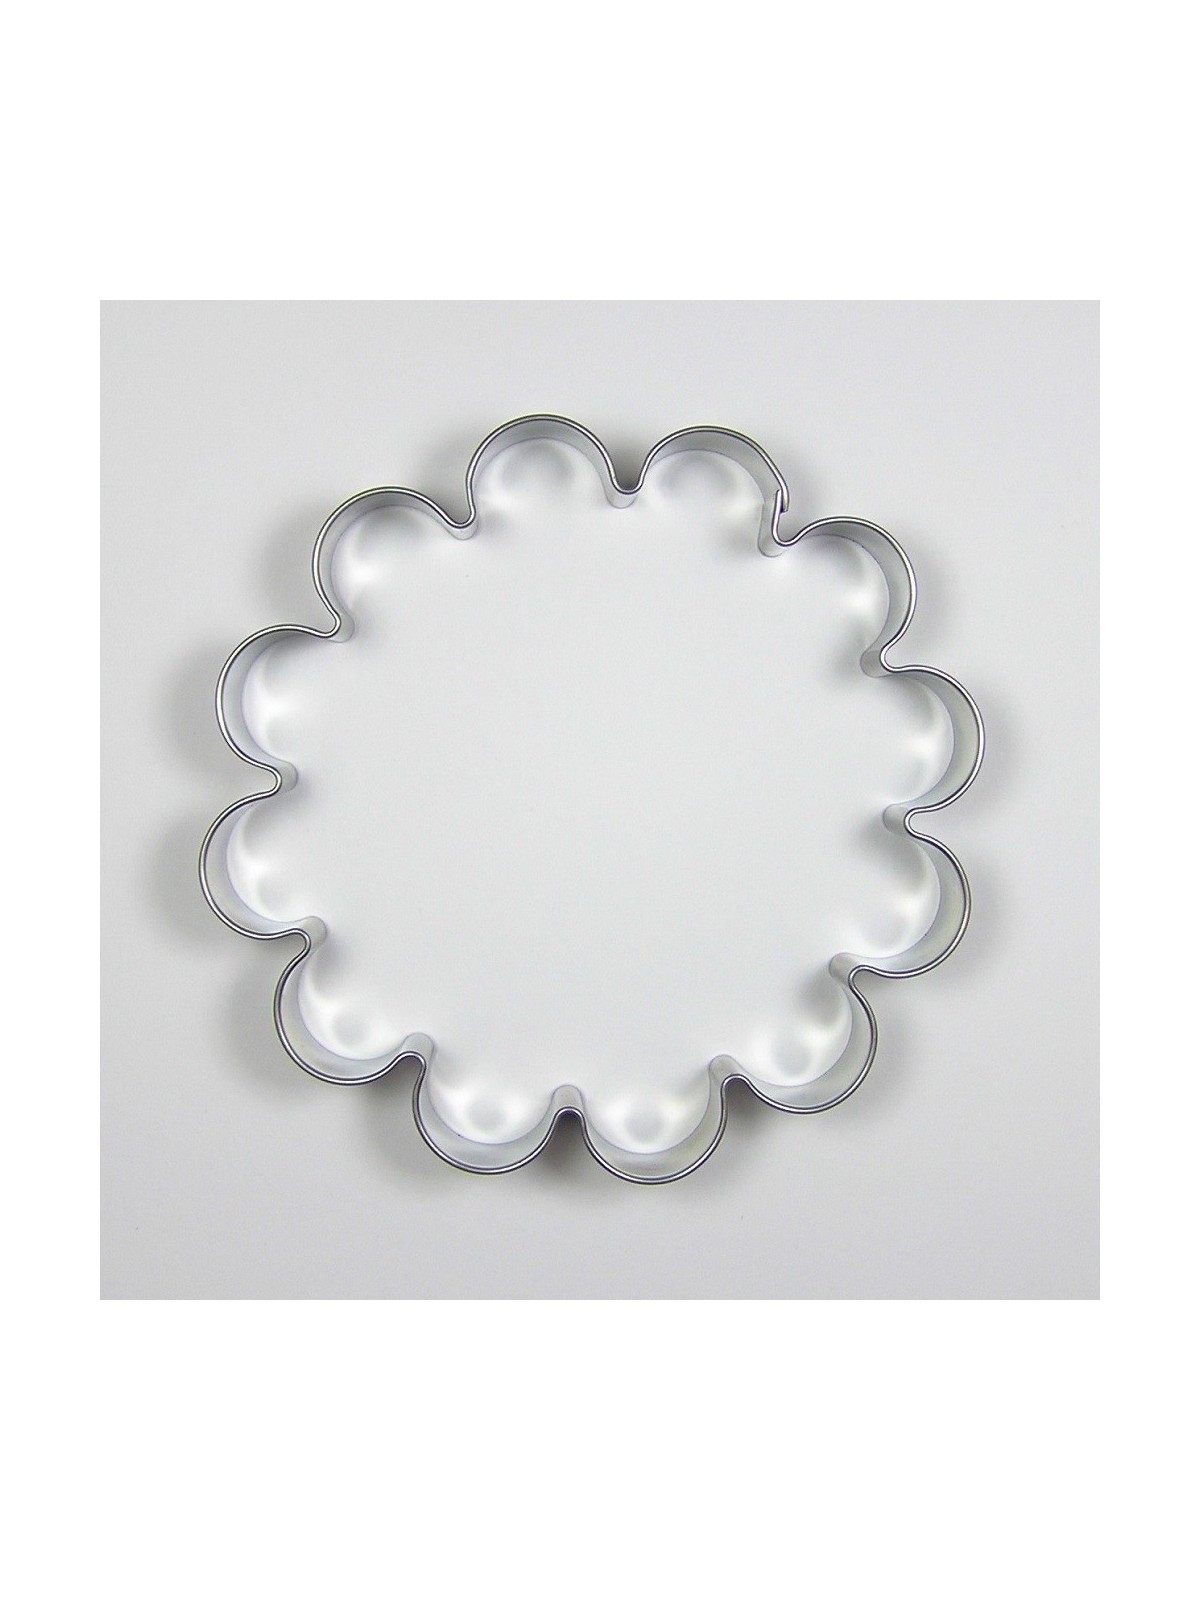 Stainless steel cookie cutter - decorative circle